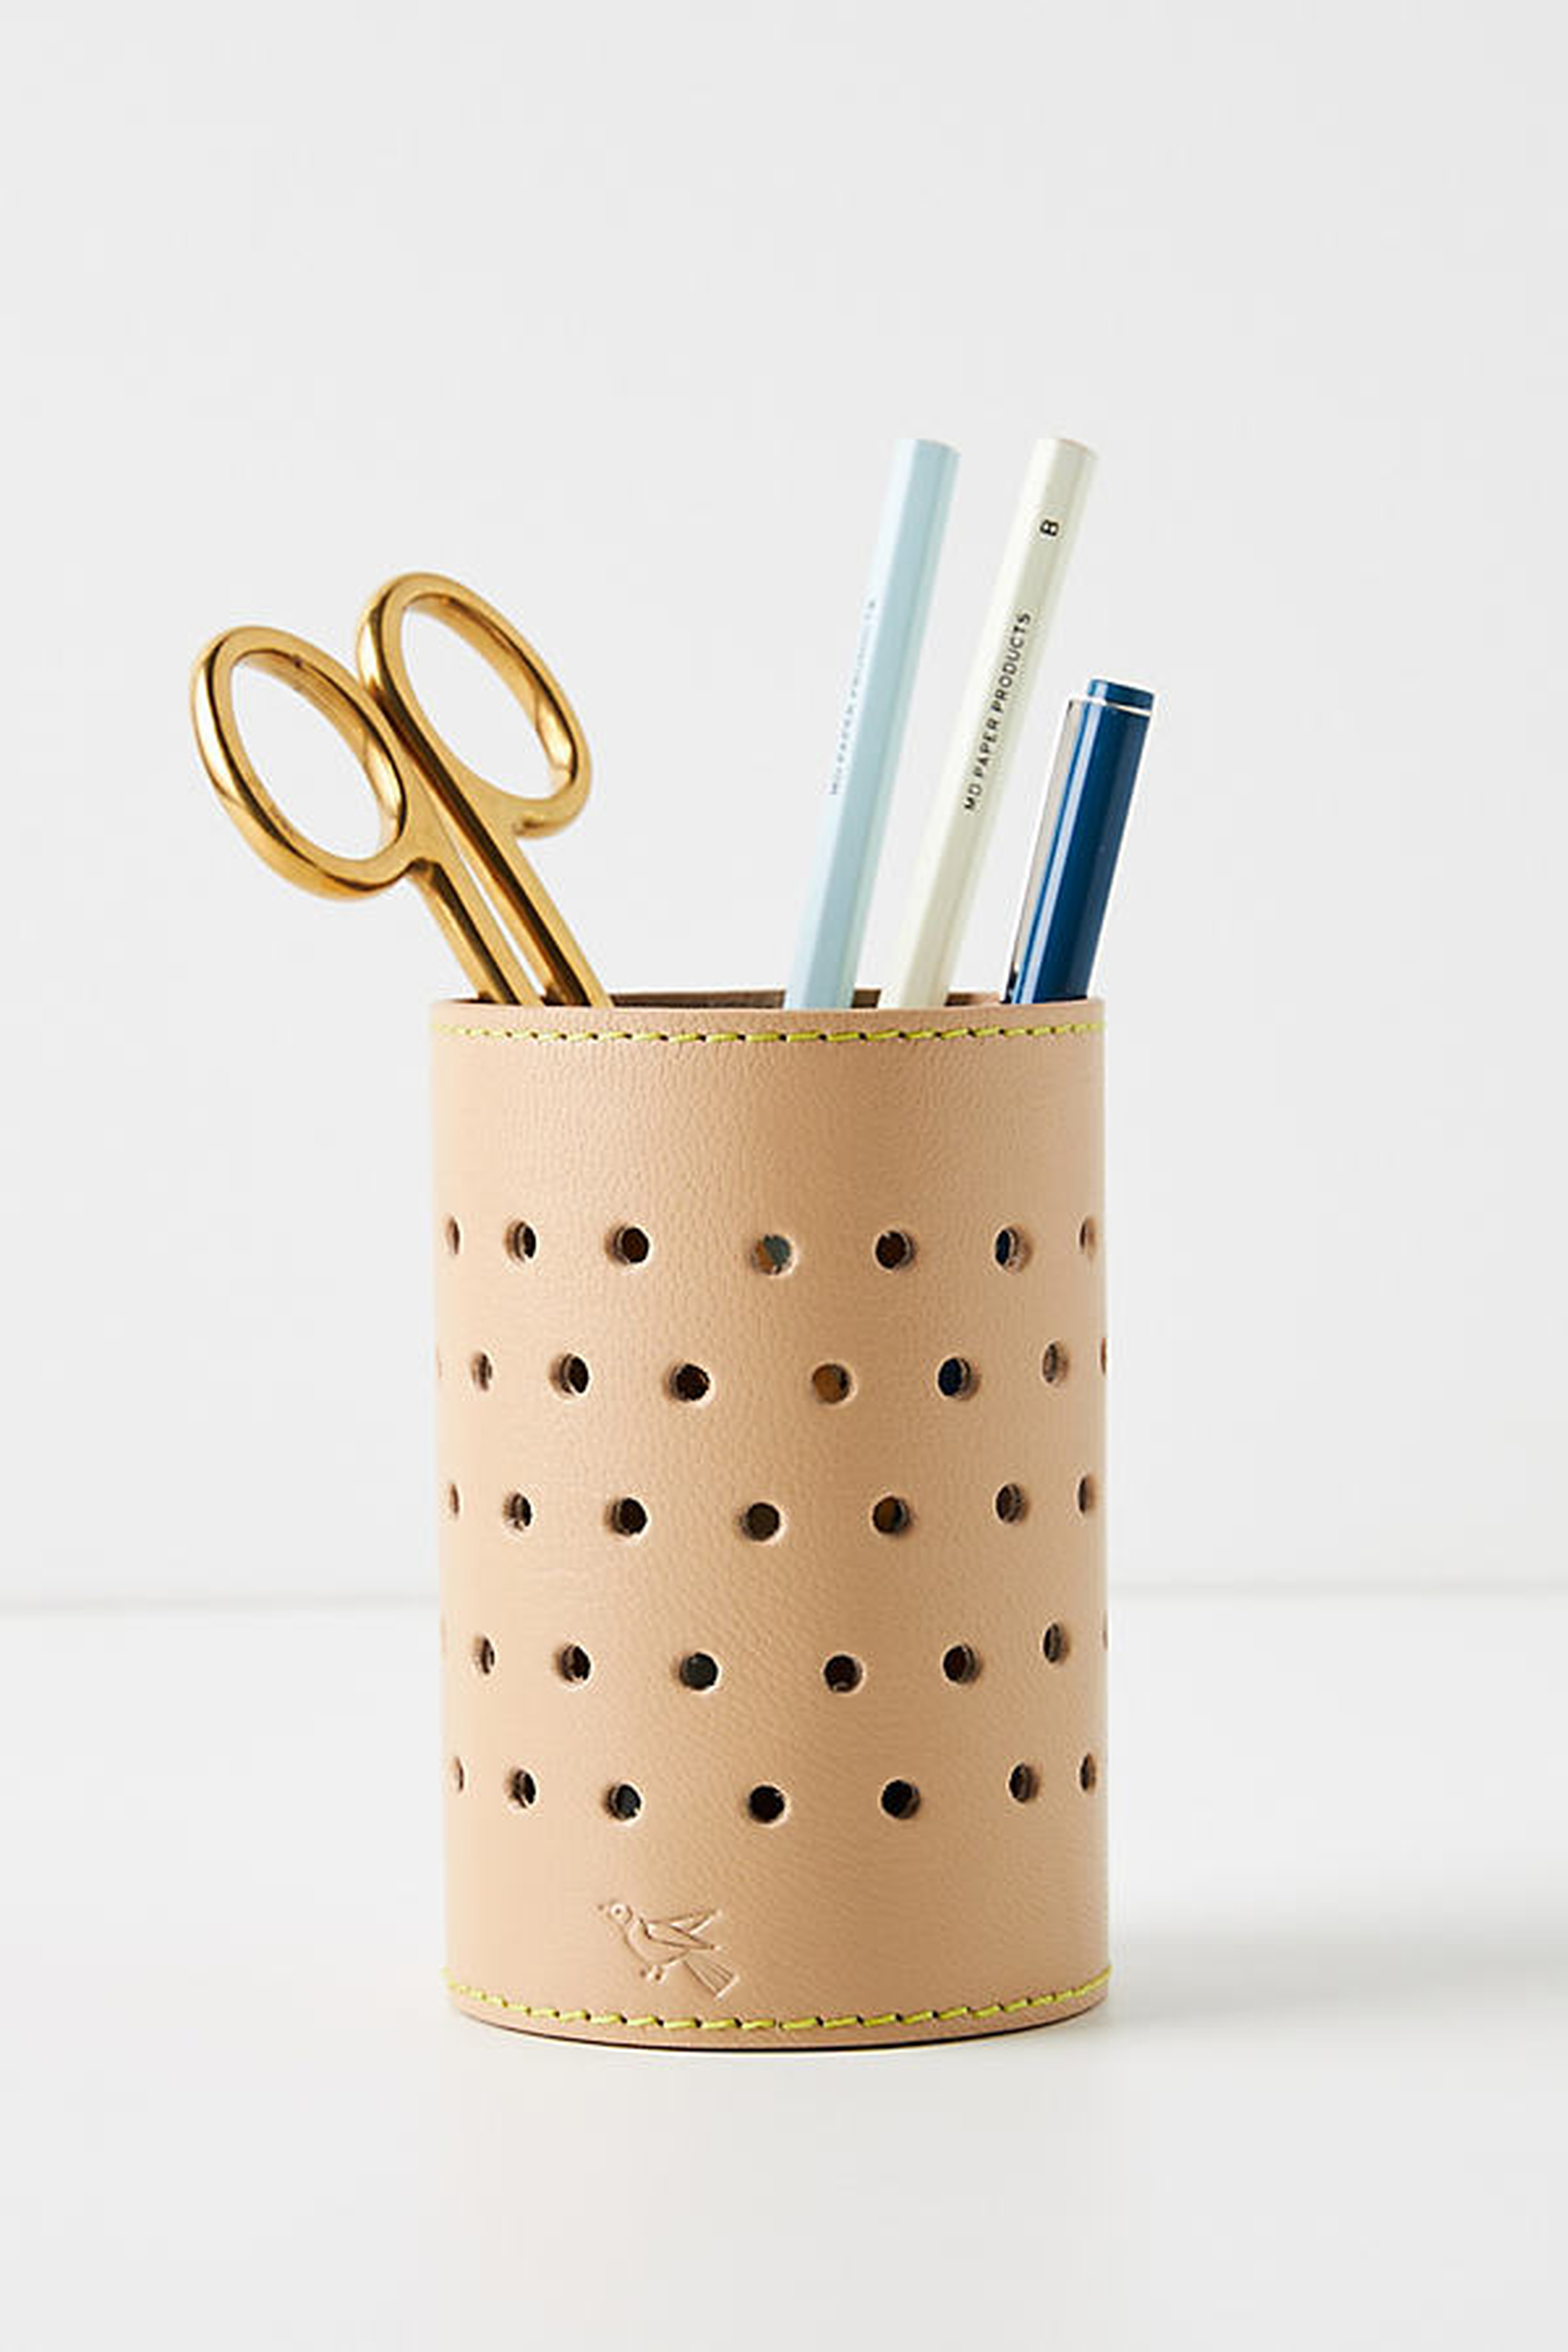 Carina Leather Pencil Cup By Anthropologie in Beige - Anthropologie